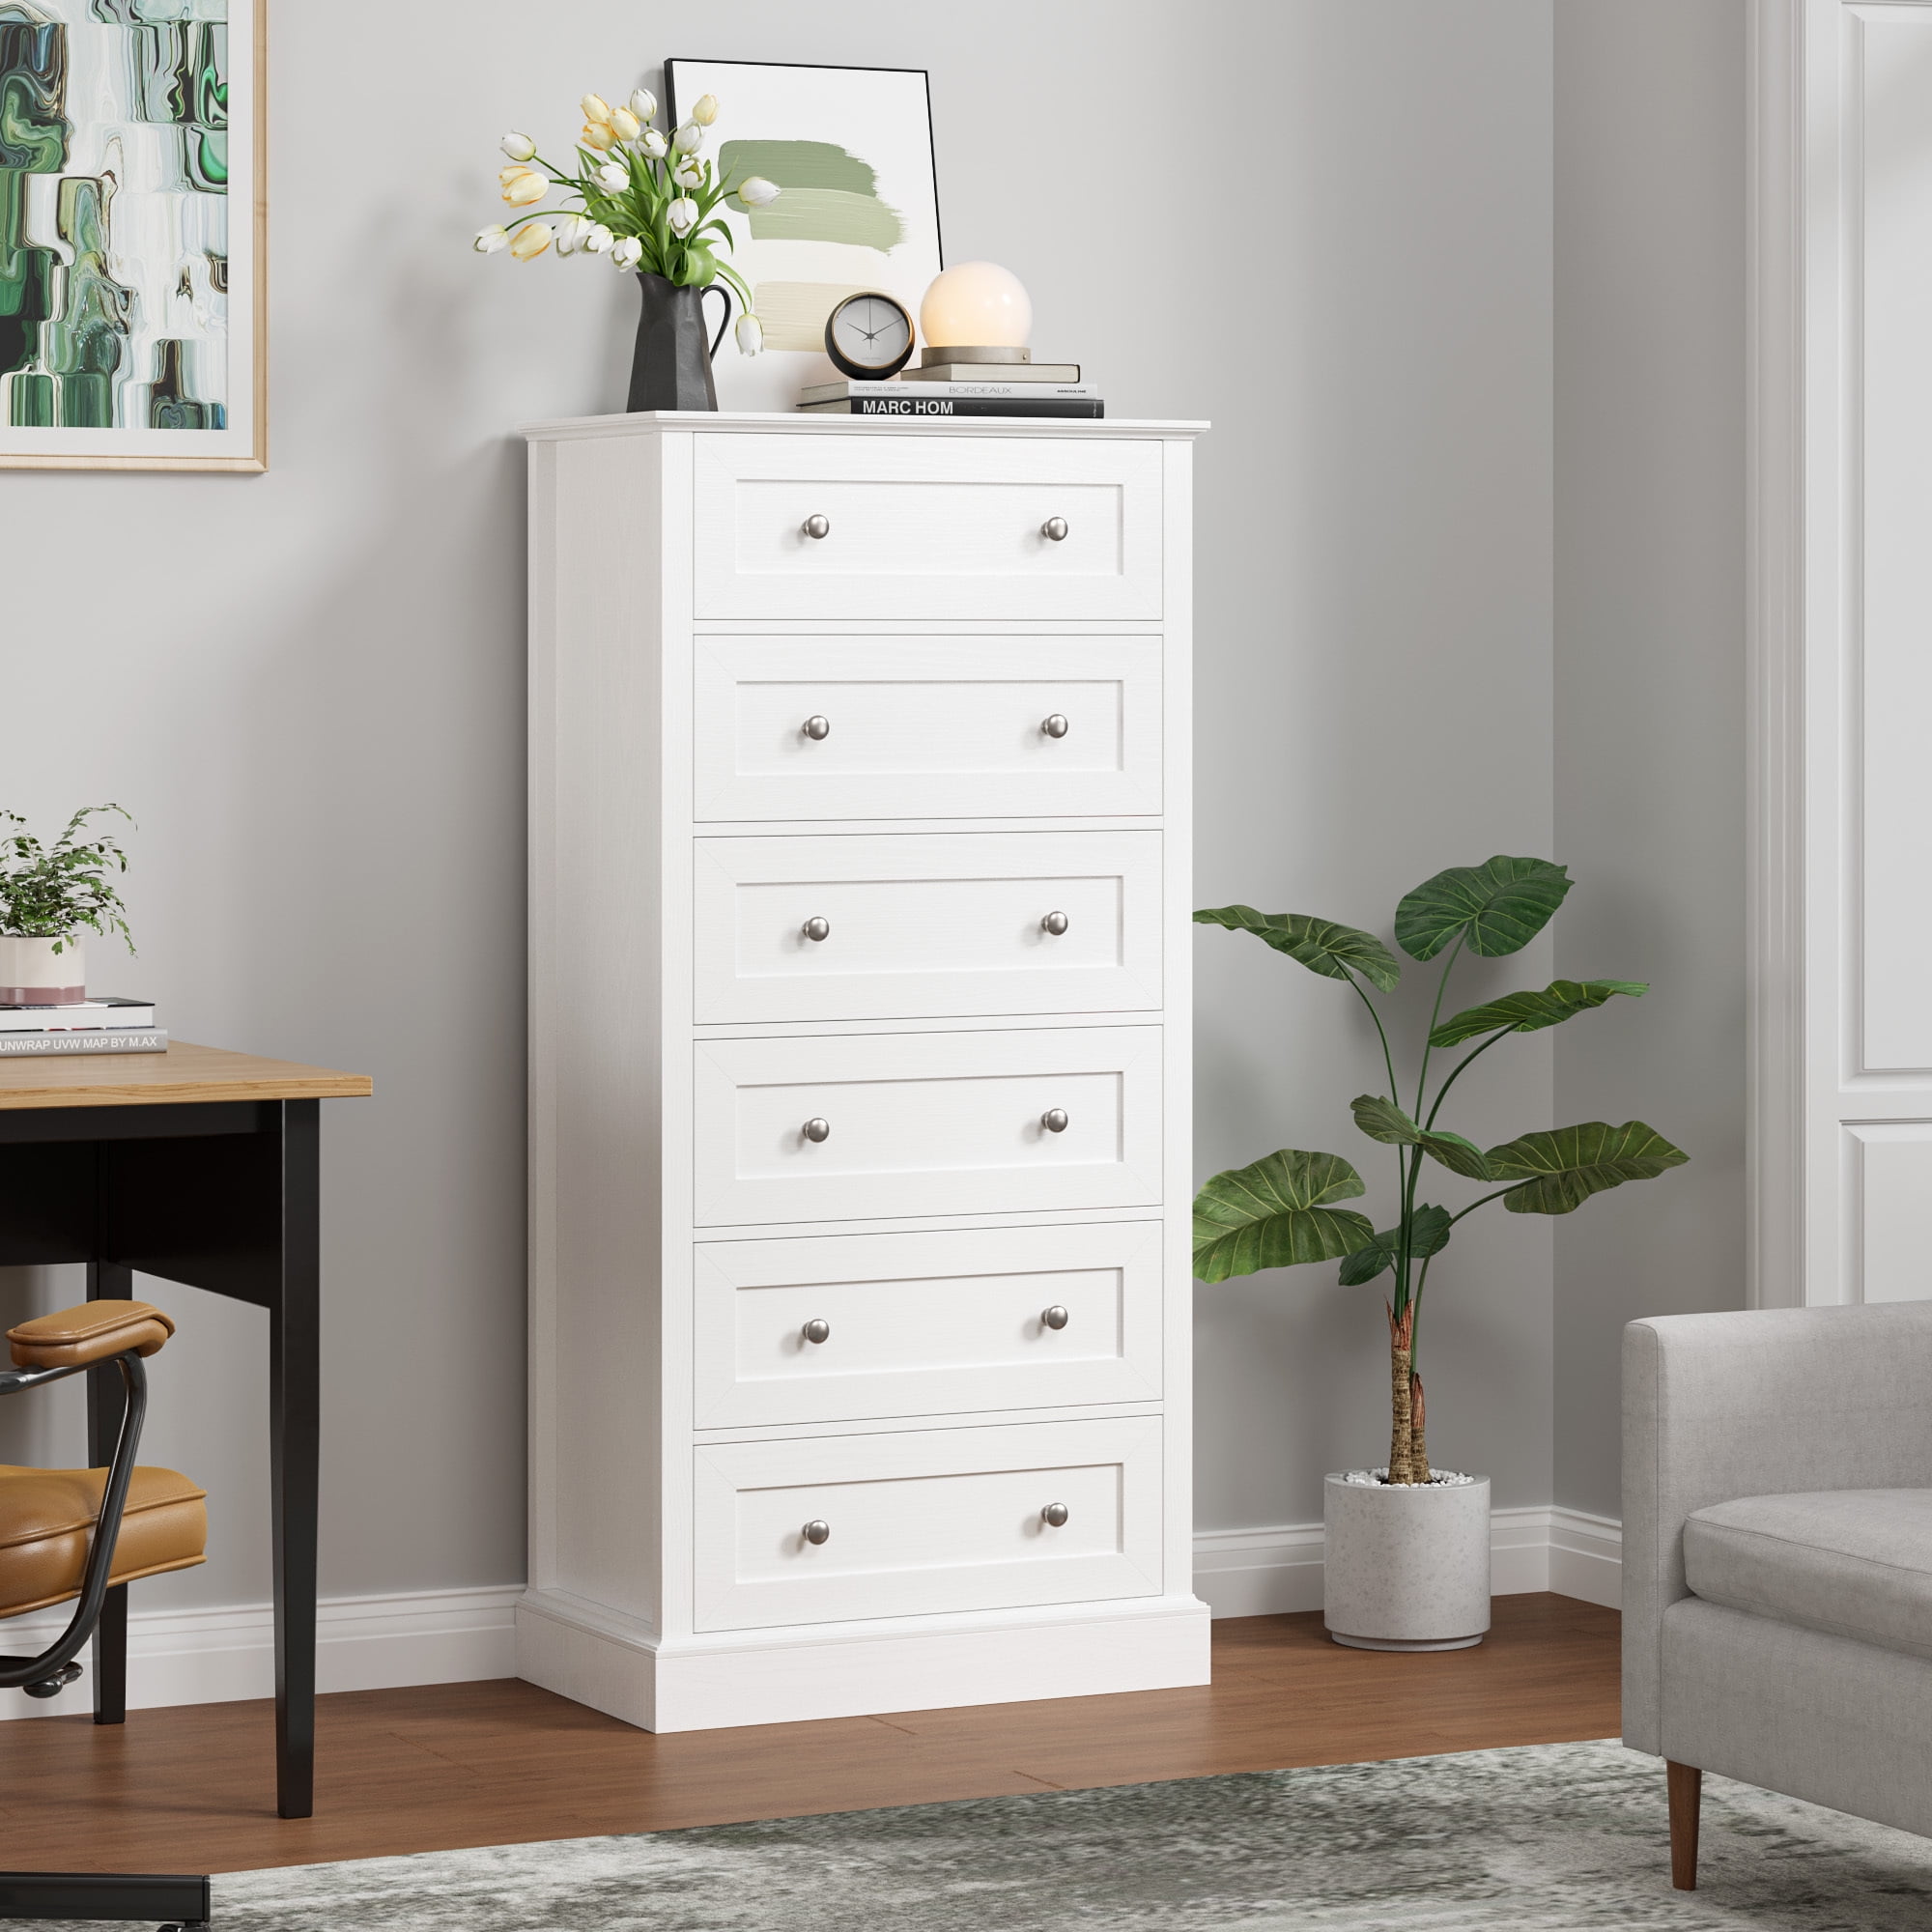 Storage Cabinet Multi-functional with 6 Drawers For Home Bedroom